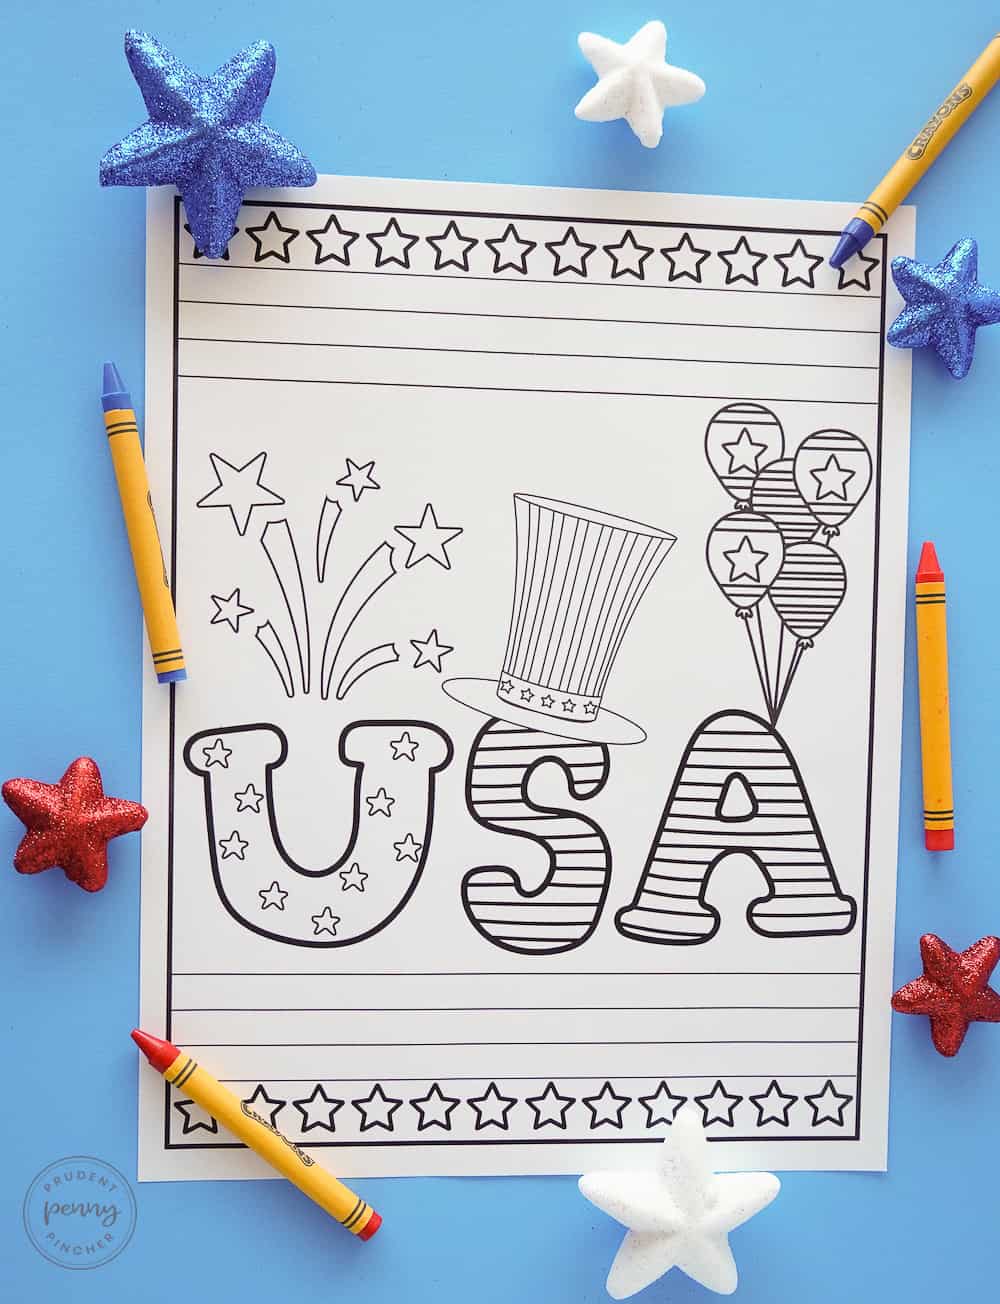 usa words with fireworks, uncle sam hat and patriotic balloons